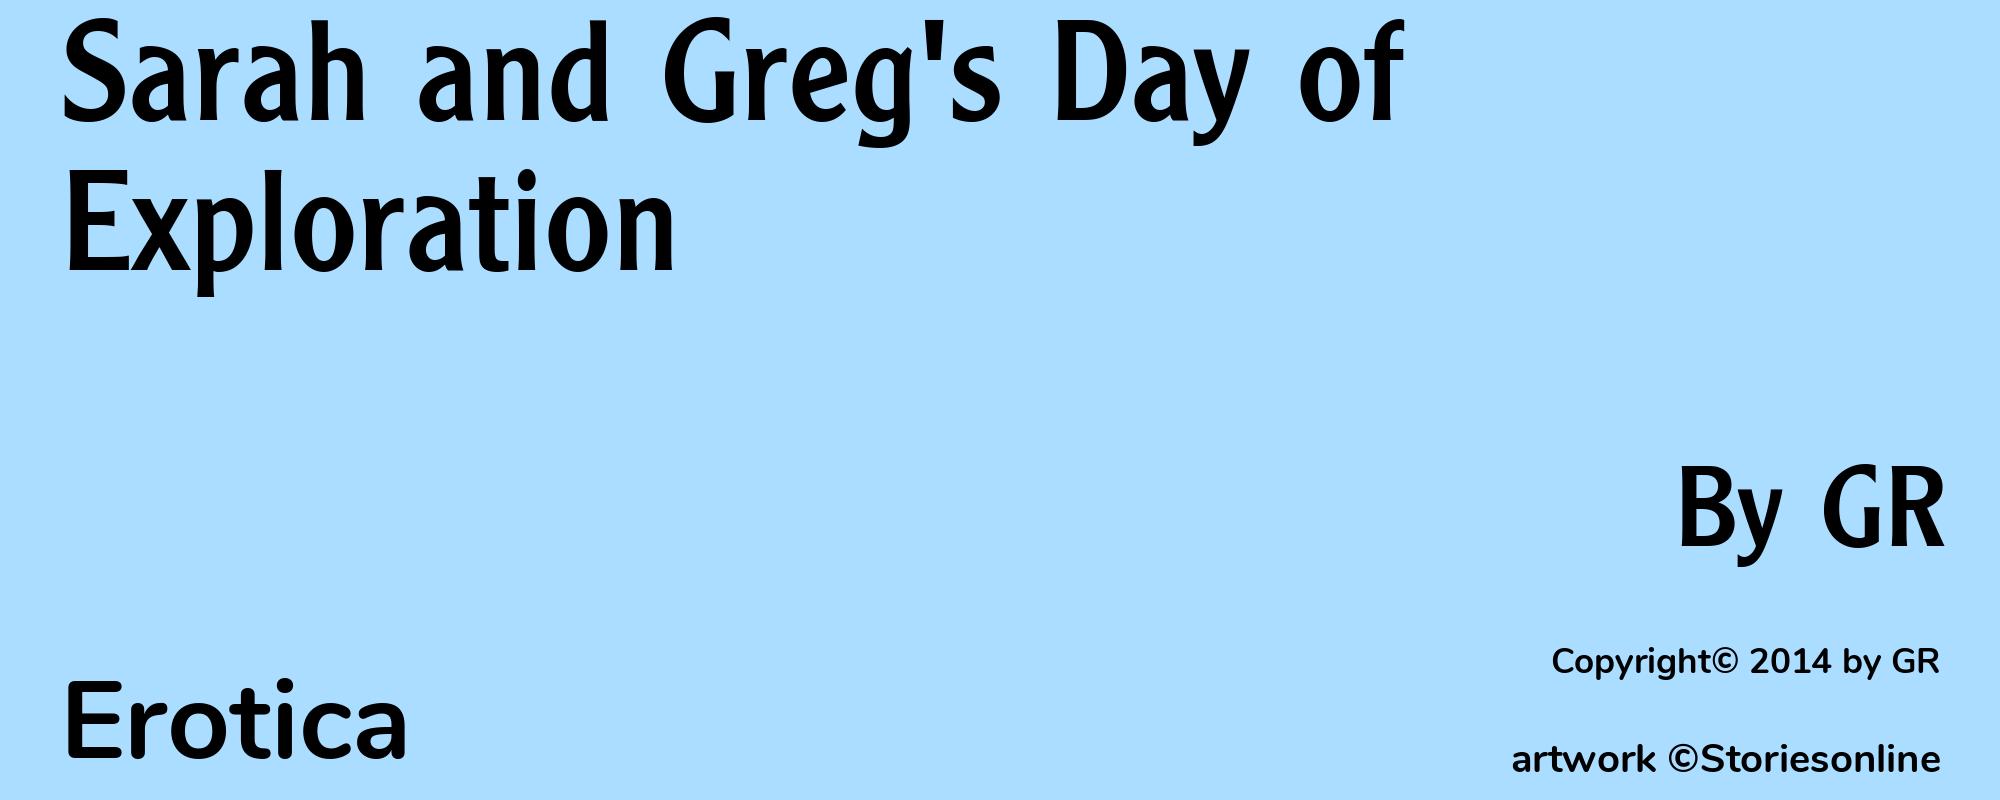 Sarah and Greg's Day of Exploration - Cover